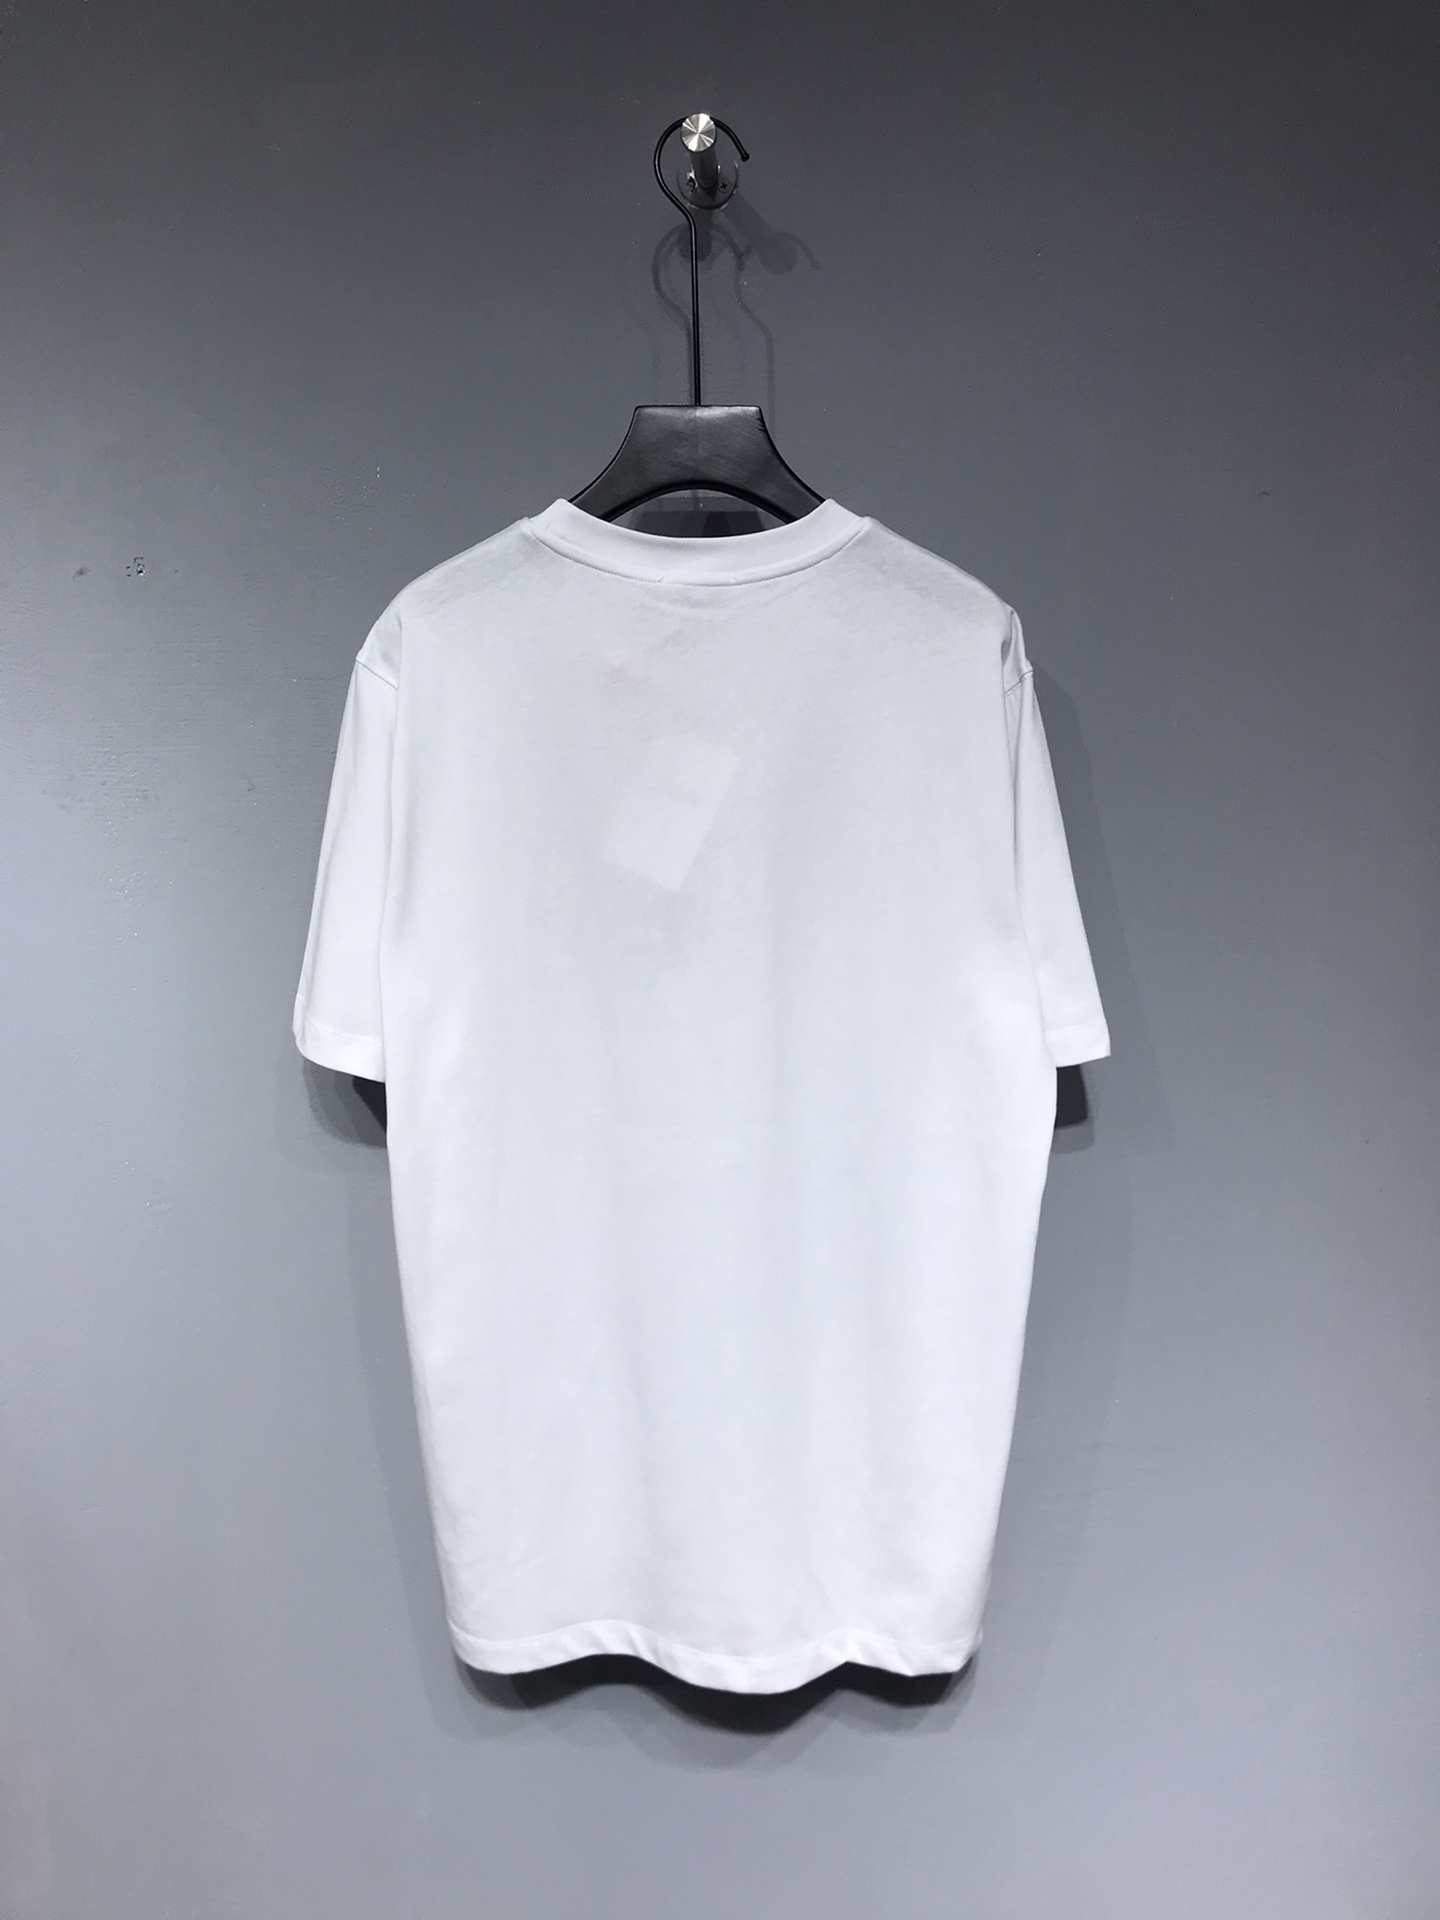 DIOR 2021SS New Arrival T-shirt